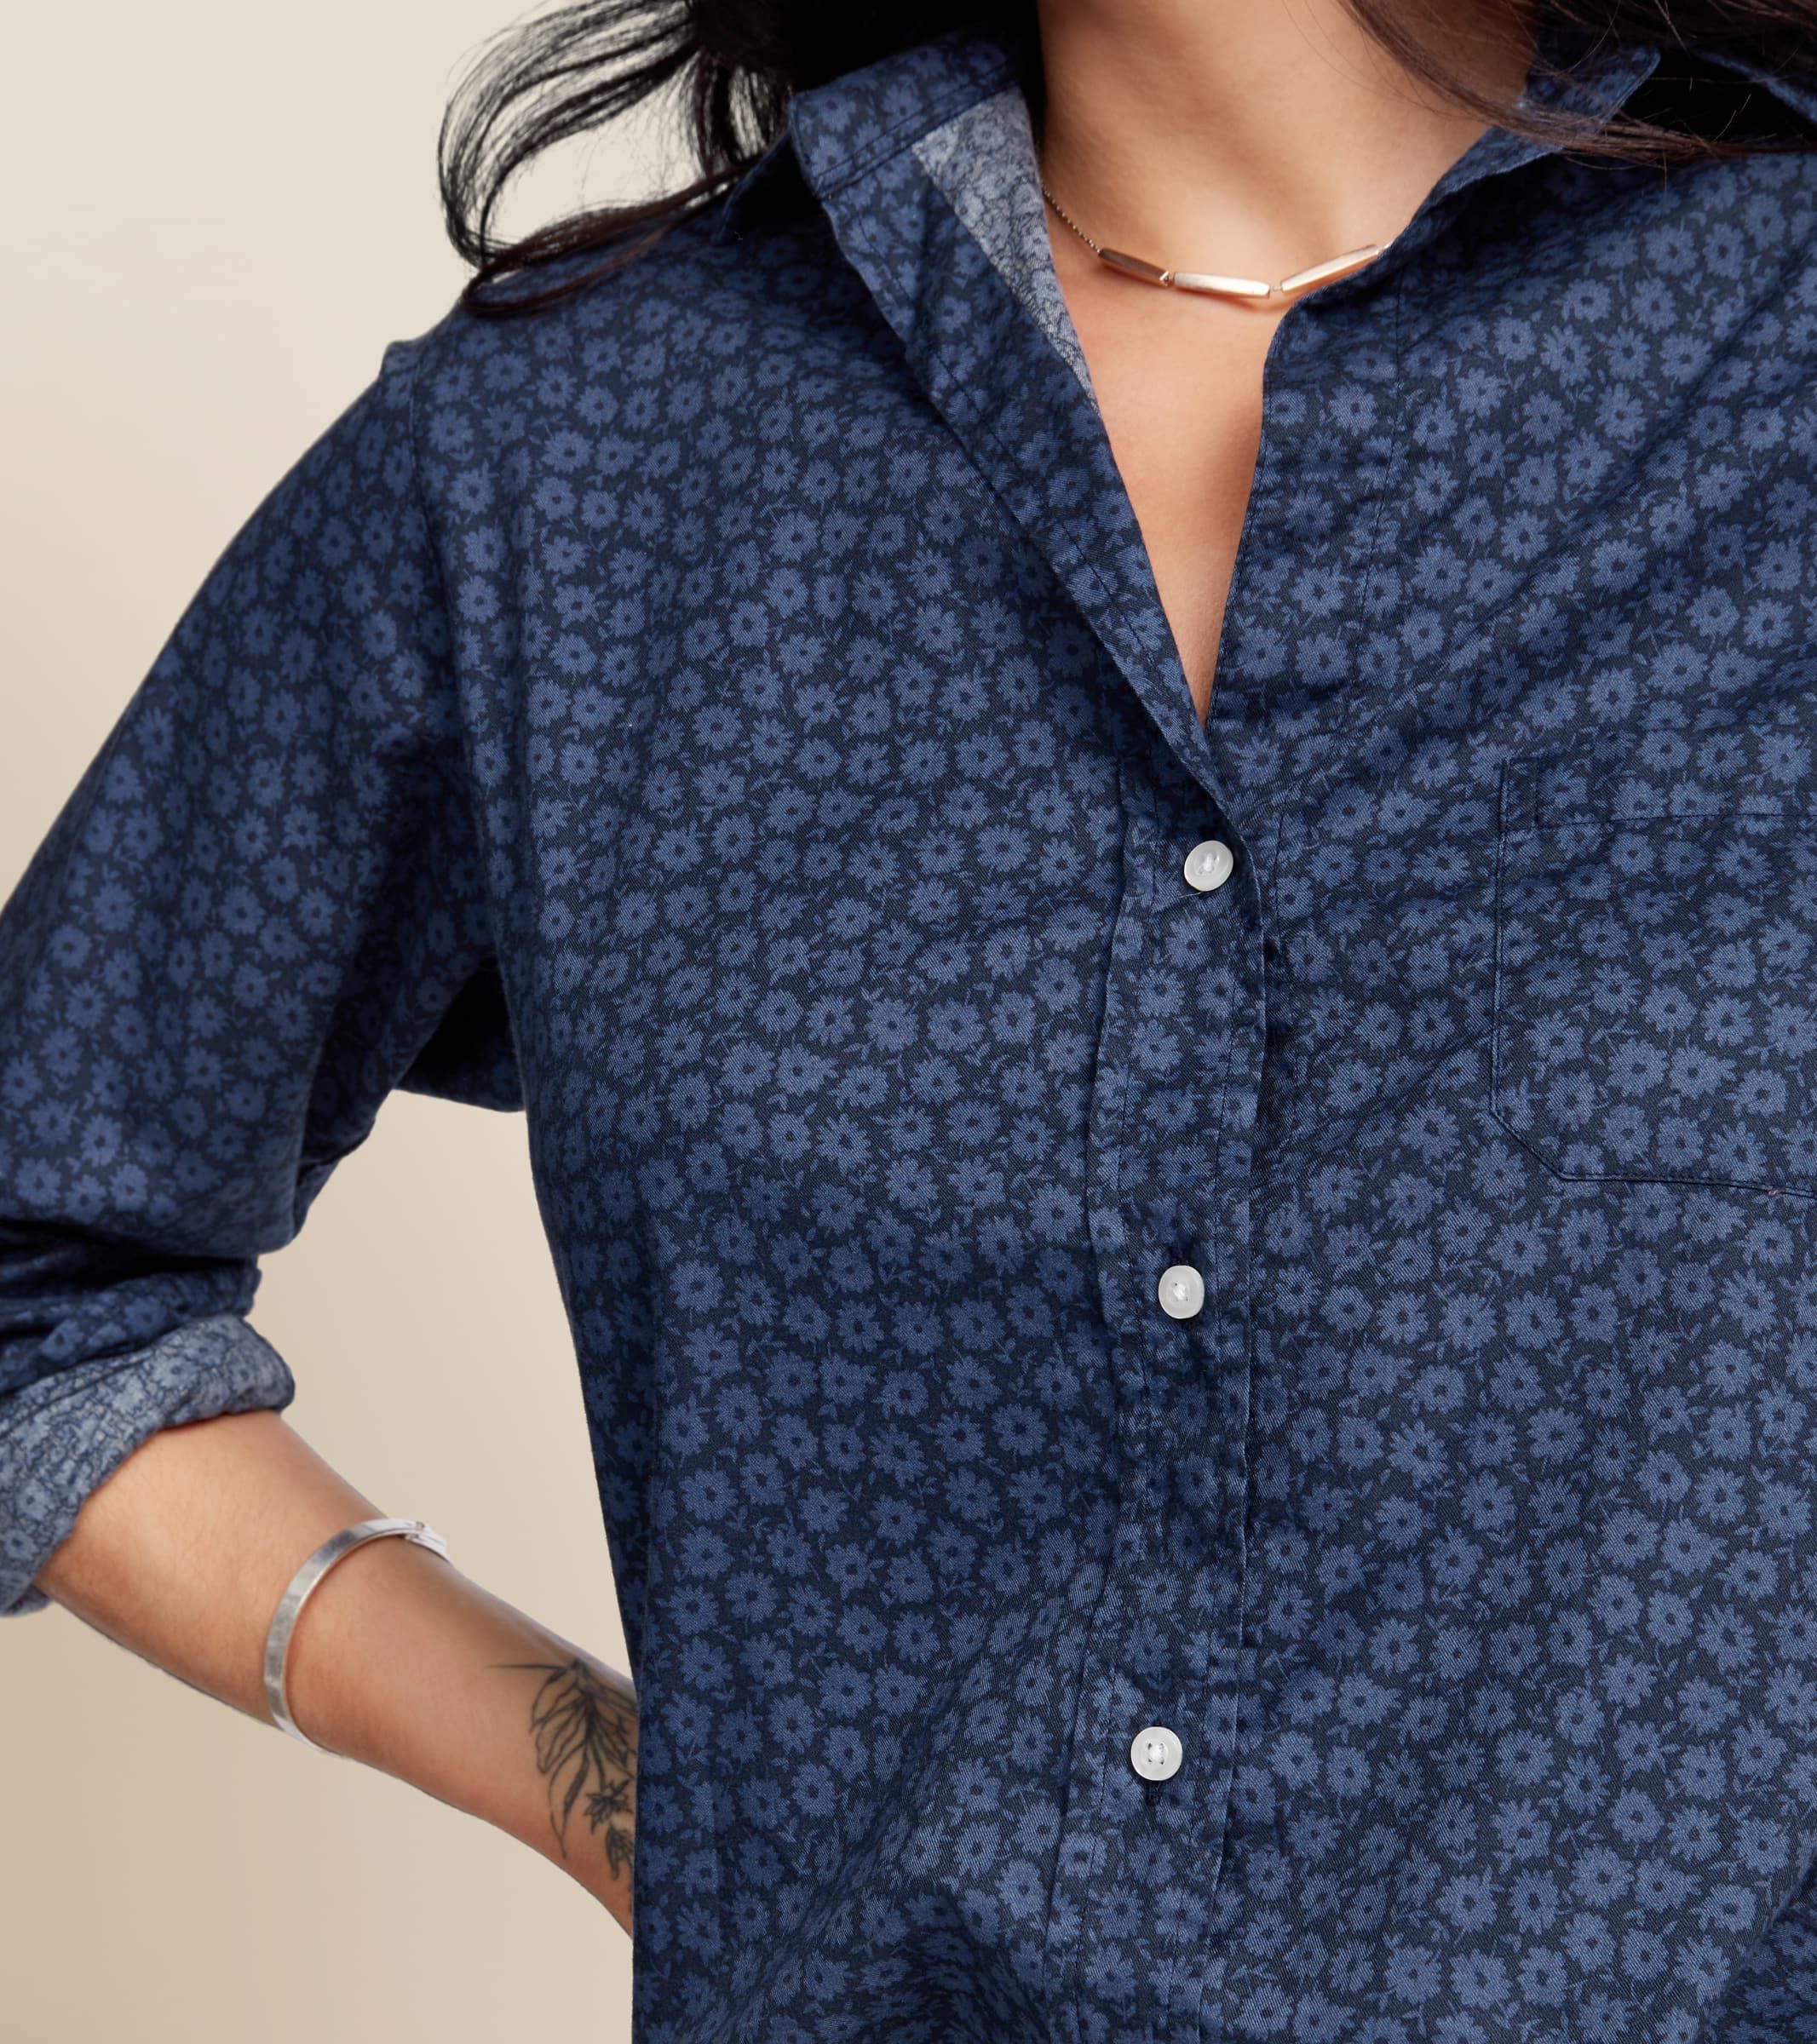 The Hero Navy with Blue Flowers, Cozy Cotton | Grayson